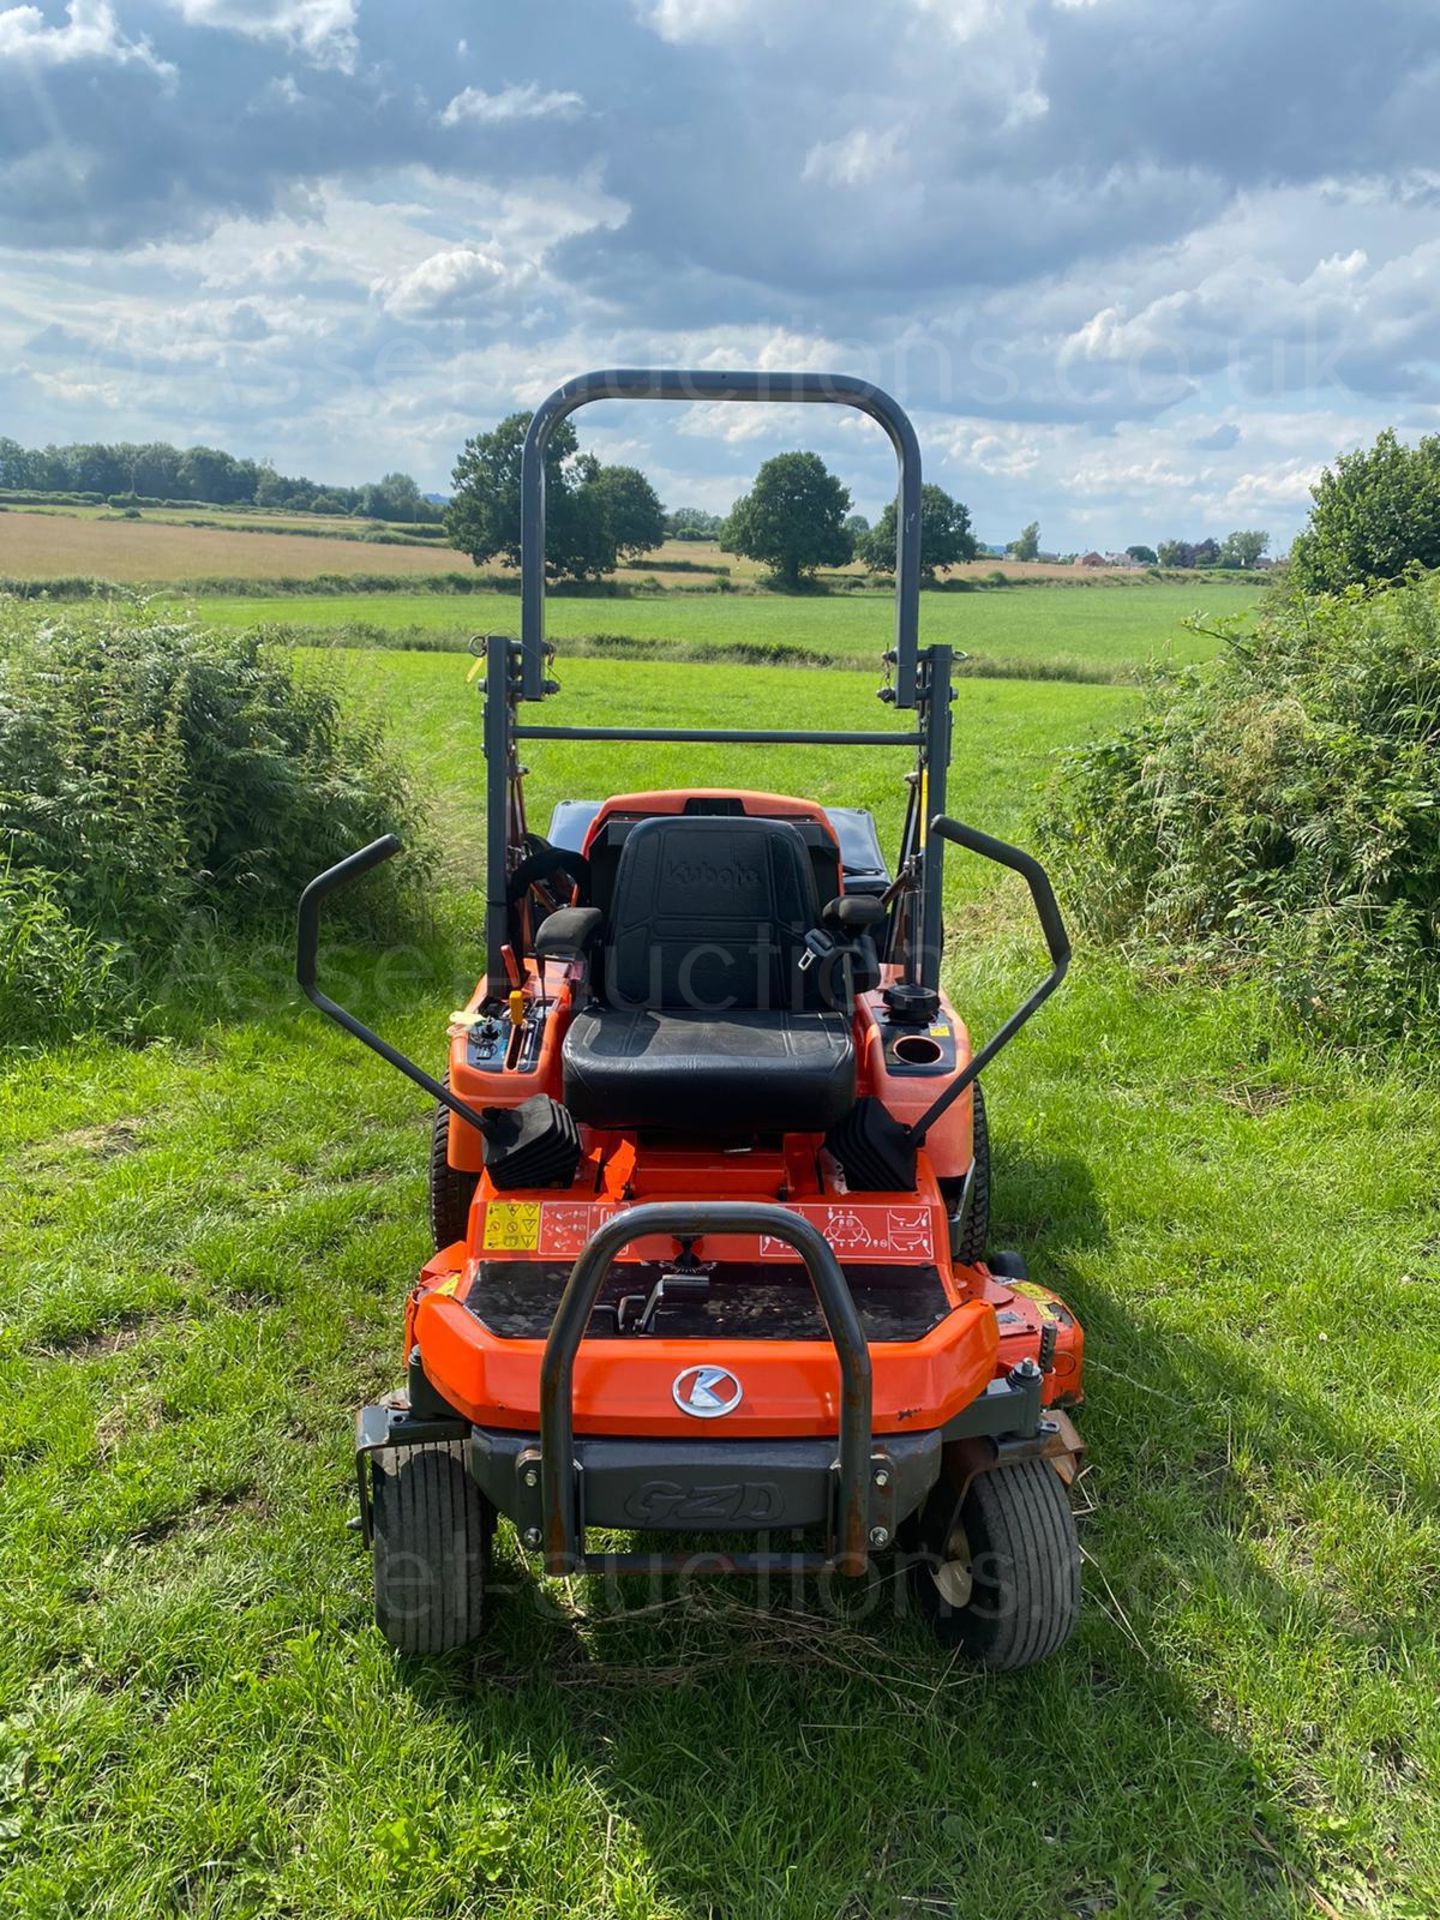 2015 KUBOTA GZD21 HIGH TIP ZERO TURN MOWER, SOLD NEW MID 2017, SHOWING A LOW 203 HOURS *PLUS VAT* - Image 10 of 16